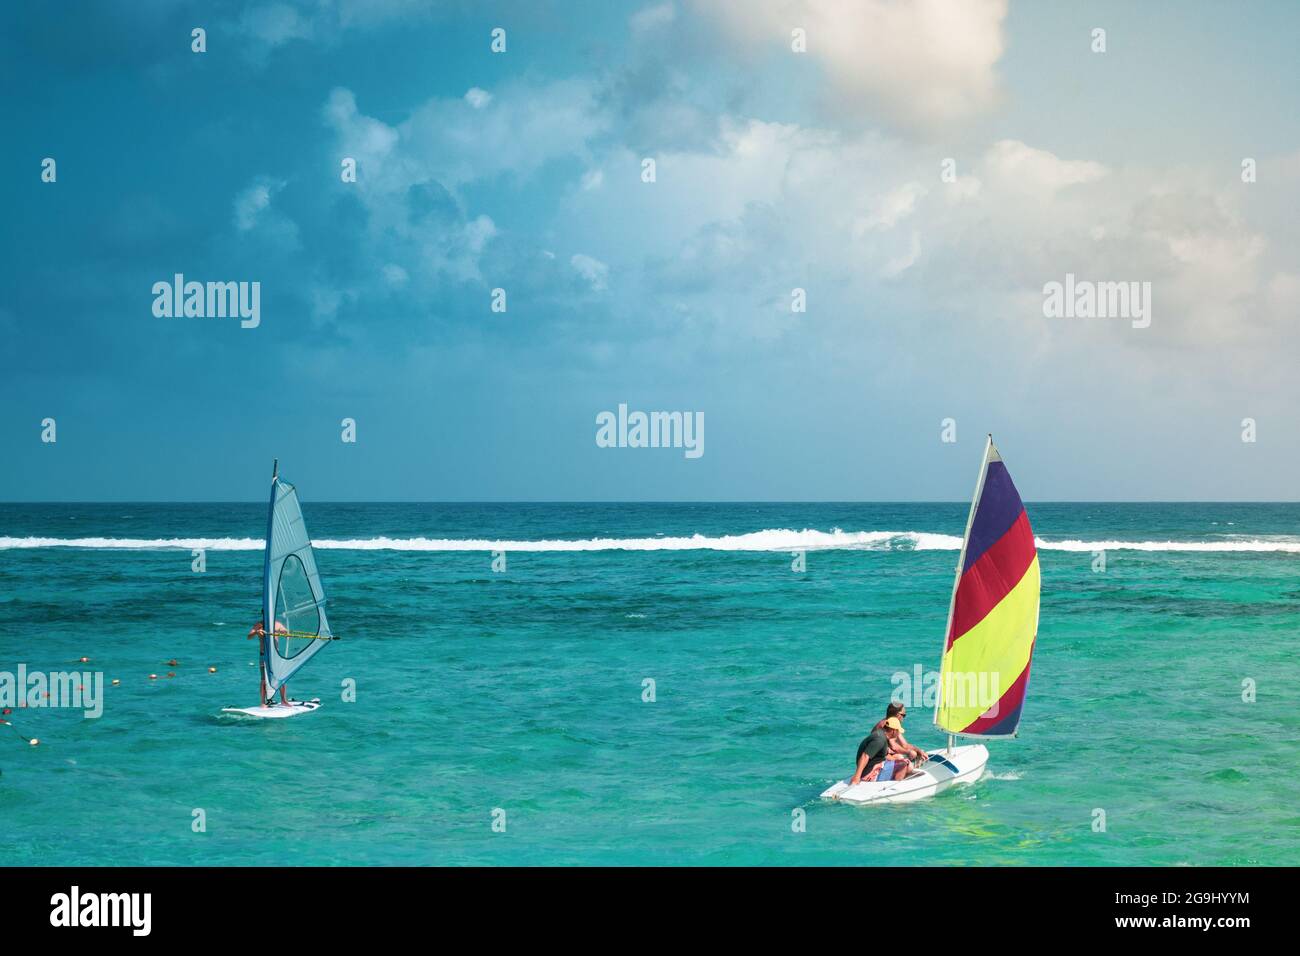 Two windsurfing boards at the Caribbean sea in the island of San Andrés, Colombia. Stock Photo